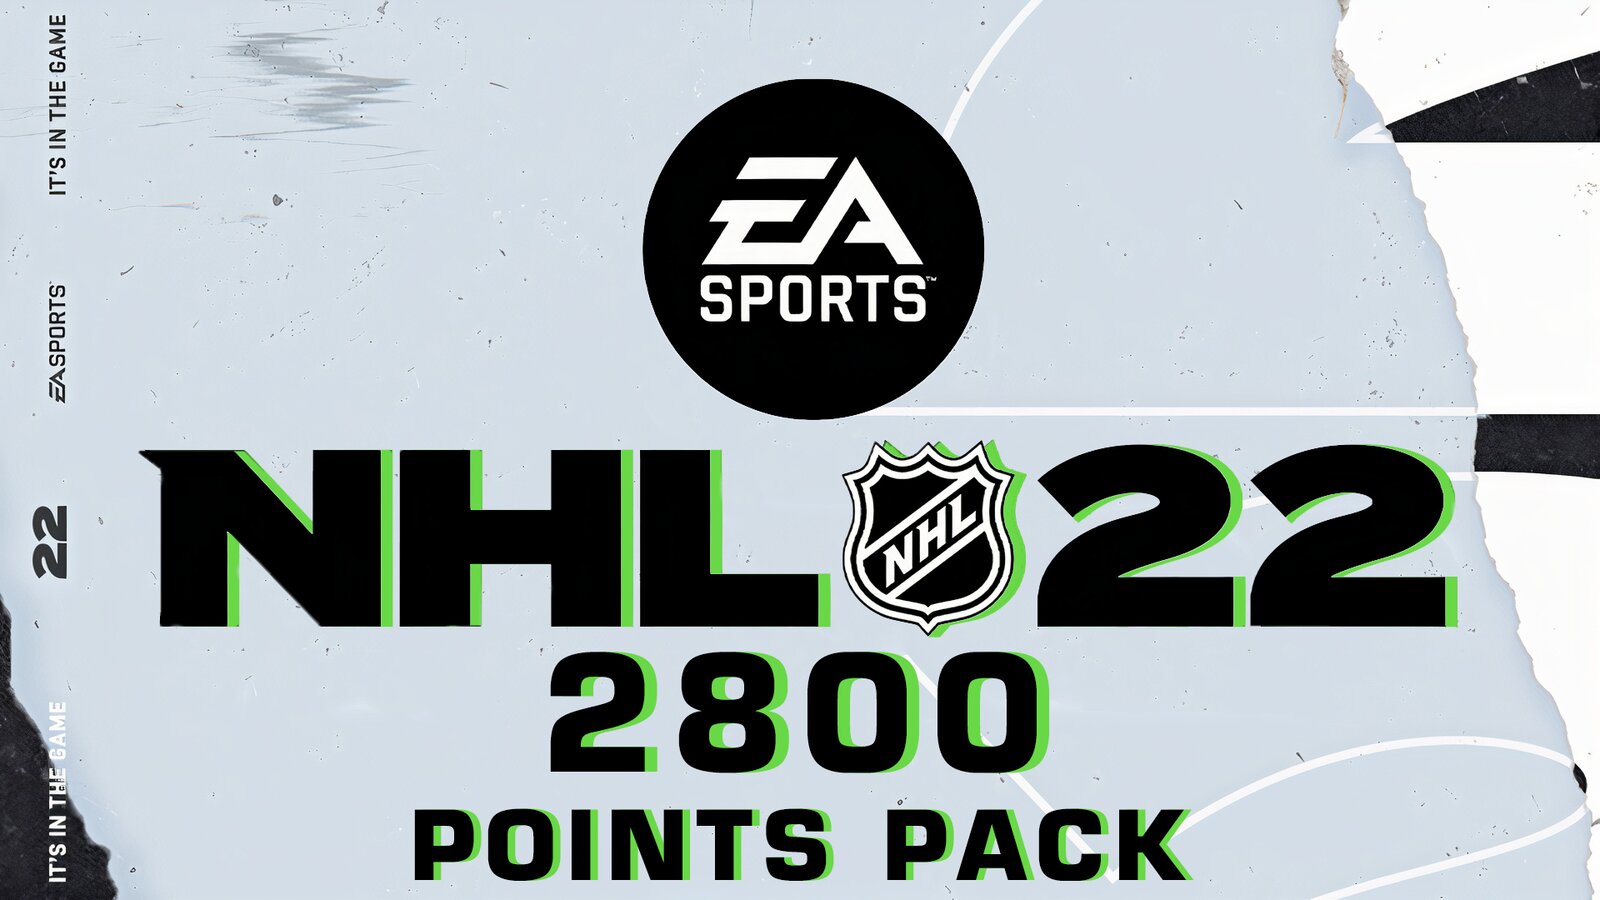 NHL 22 - 2800 Points Pack